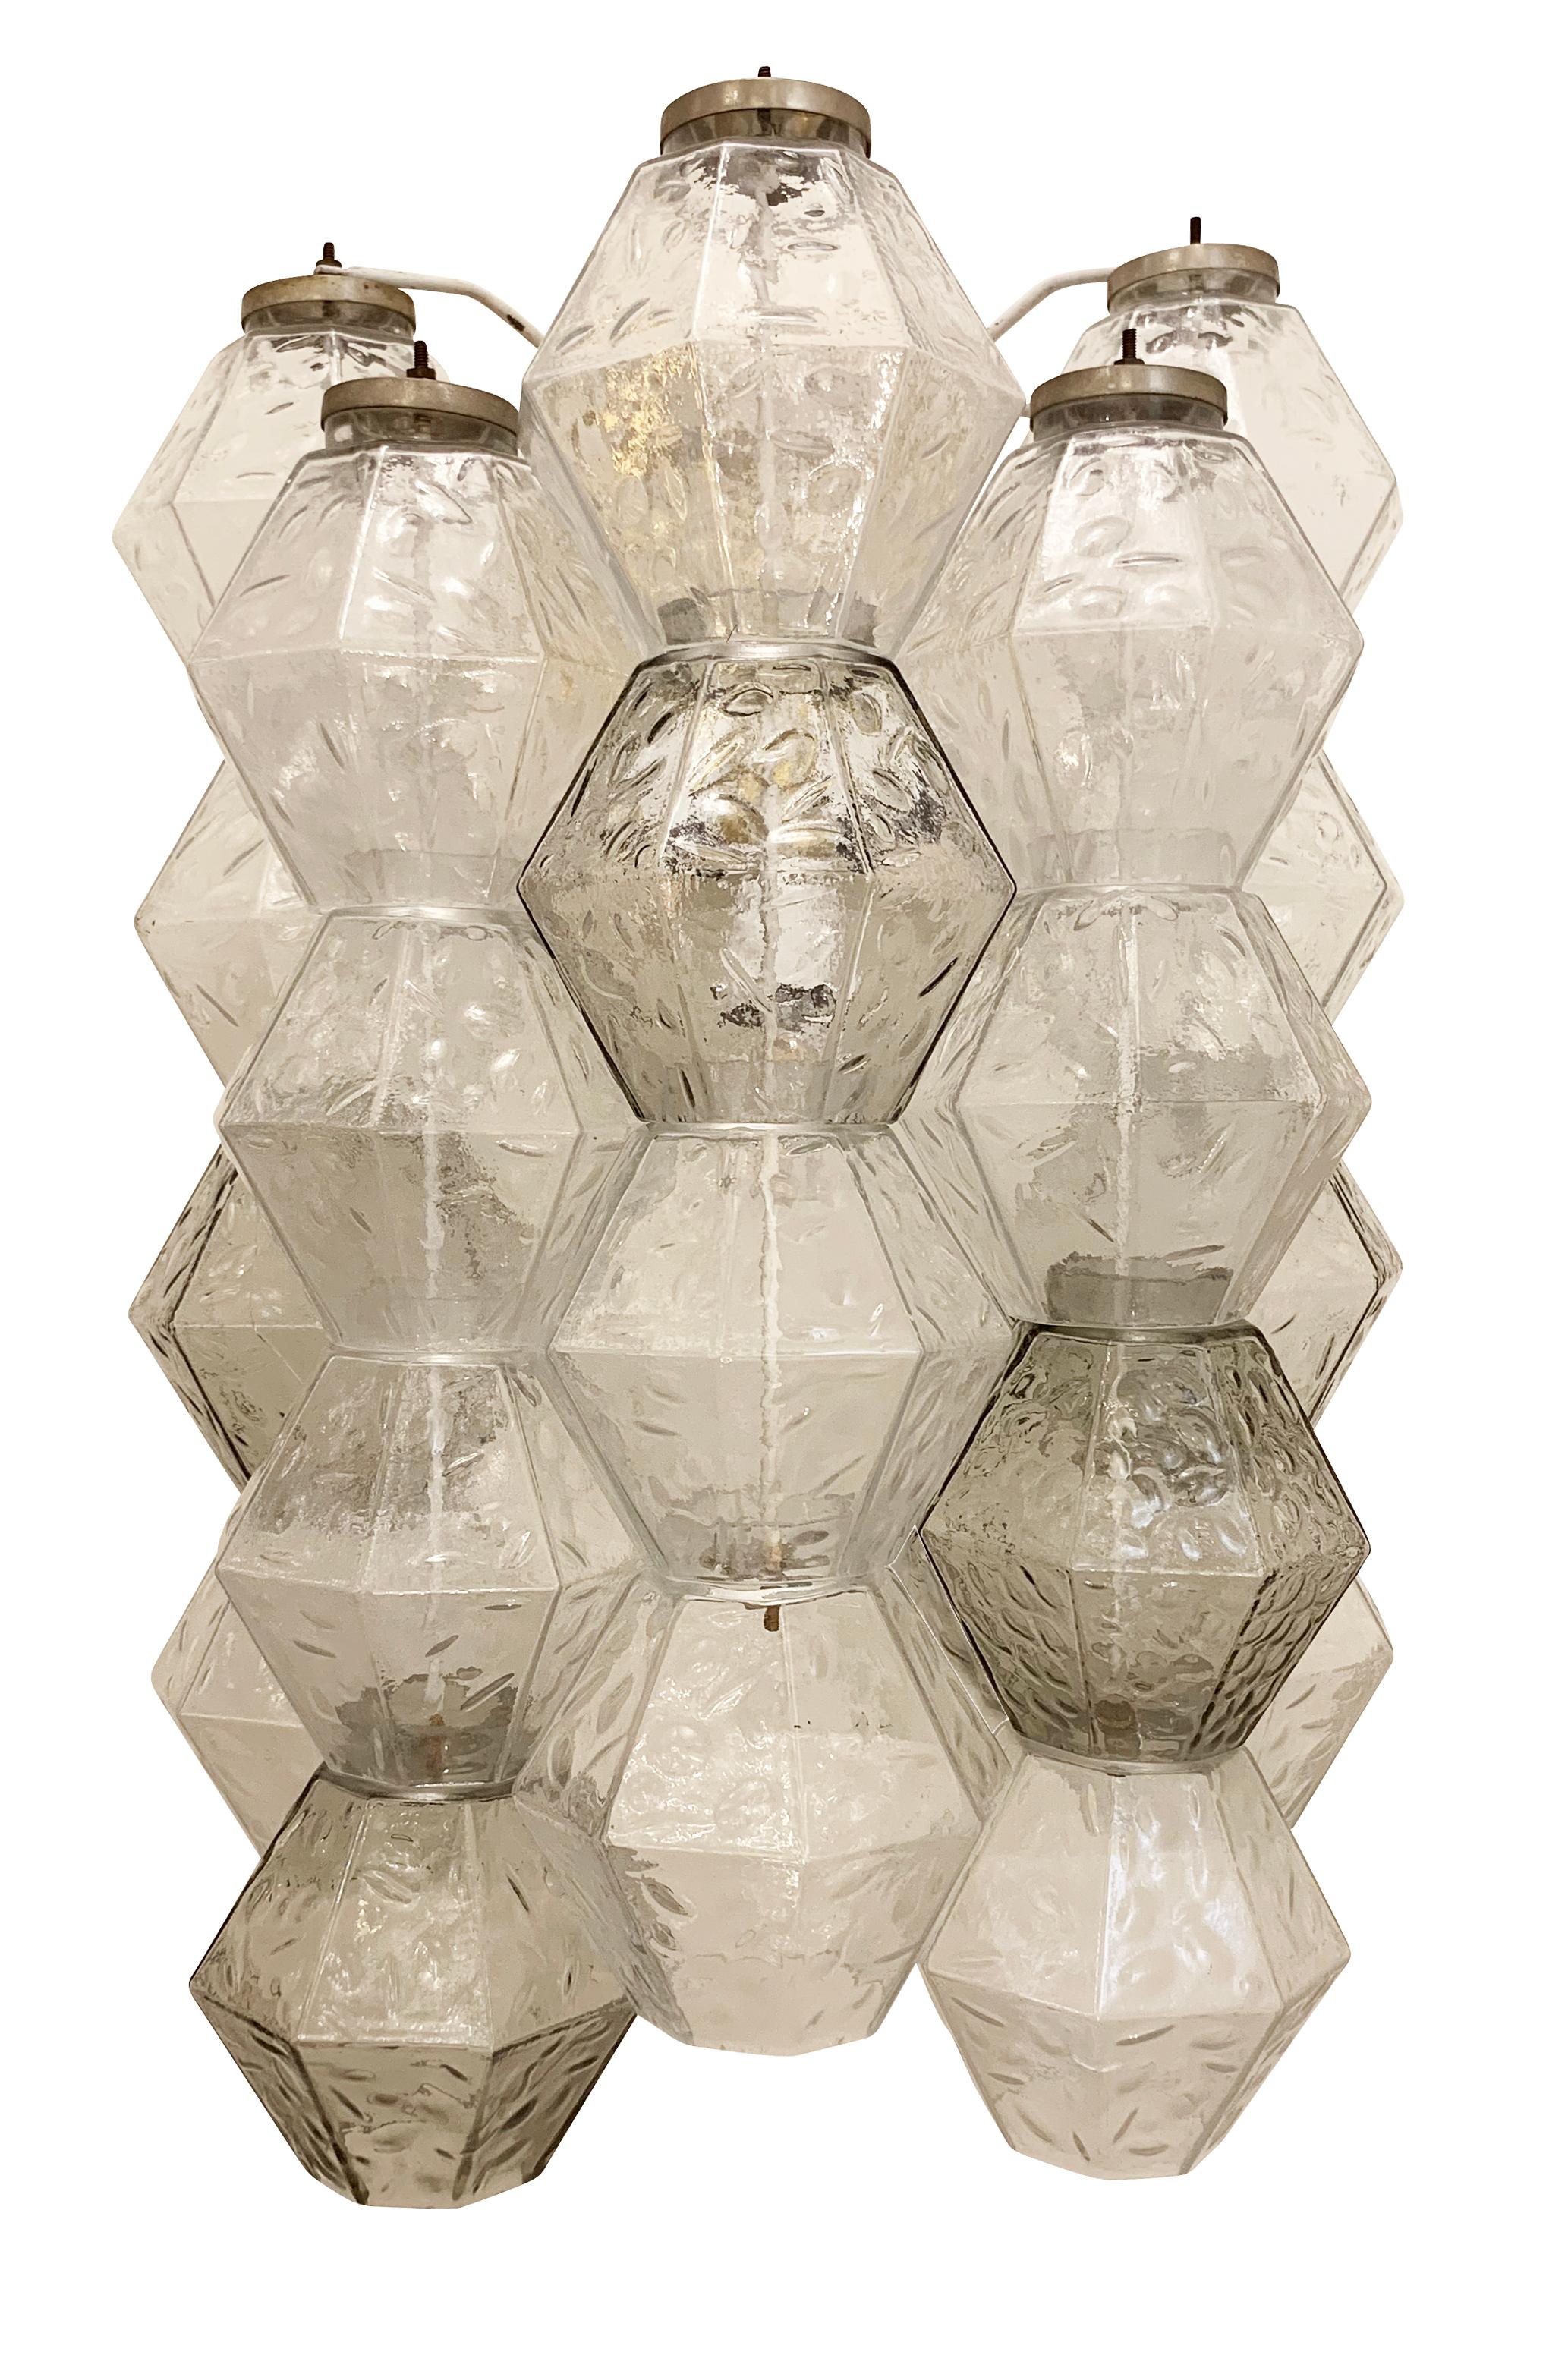 Pair of glass wall lights by Salviati from the 1960s.  Each is composed of a mix of clear and gray handblown components on a metal frame.

Condition: Excellent vintage condition, minor wear consistent with age and use.

Height: 17”

Width: